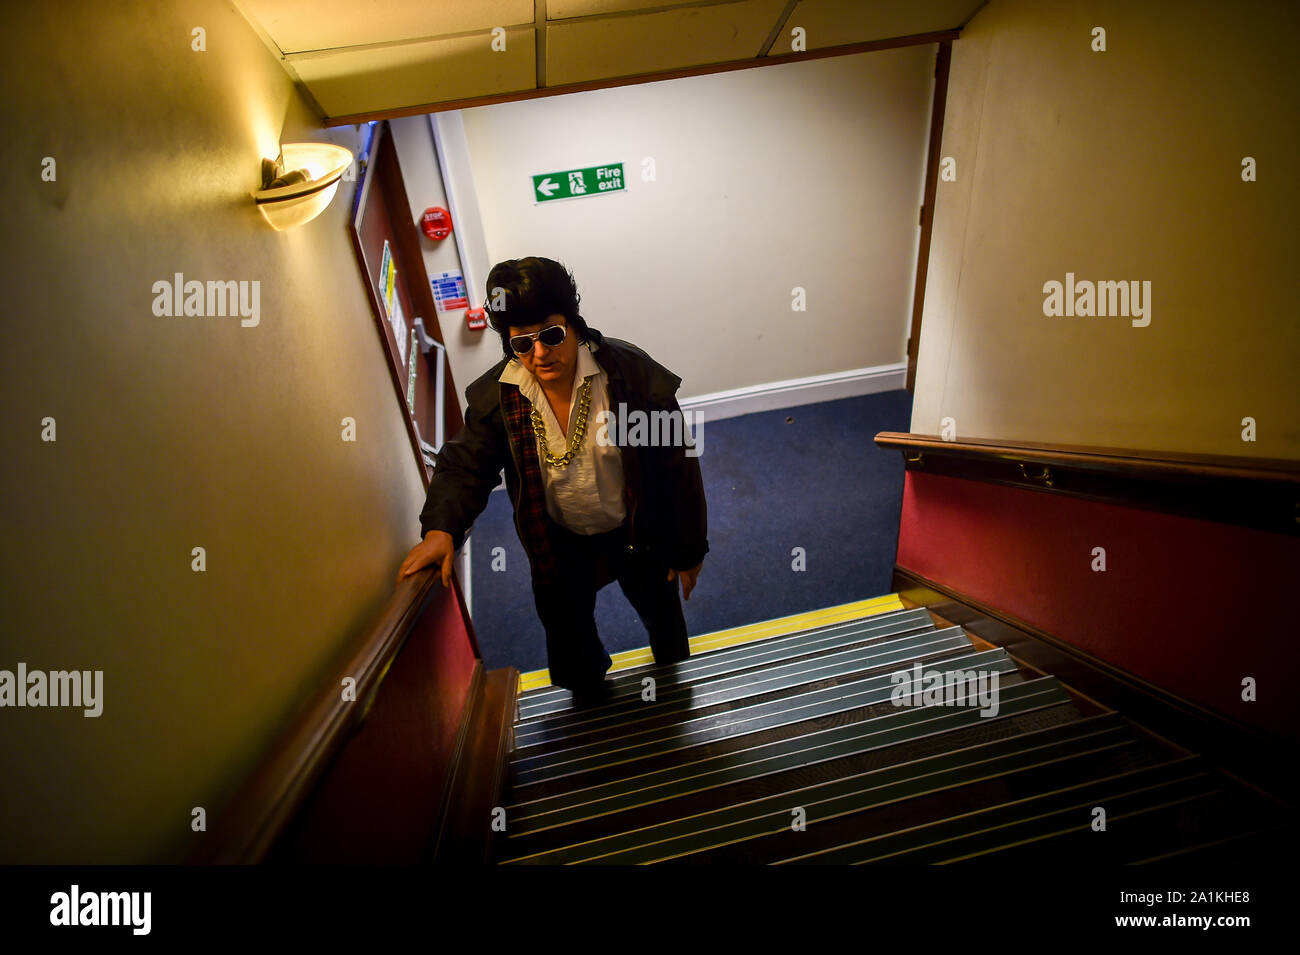 A man dressed as Elvis climbs a stairwell inside the Grand Pavillion at the annual Porthcawl Elvis Festival in south Wales. The event draws thousands of Elvis fans to the Welsh seaside town to celebrate the 'King of Rock and Roll'. Stock Photo